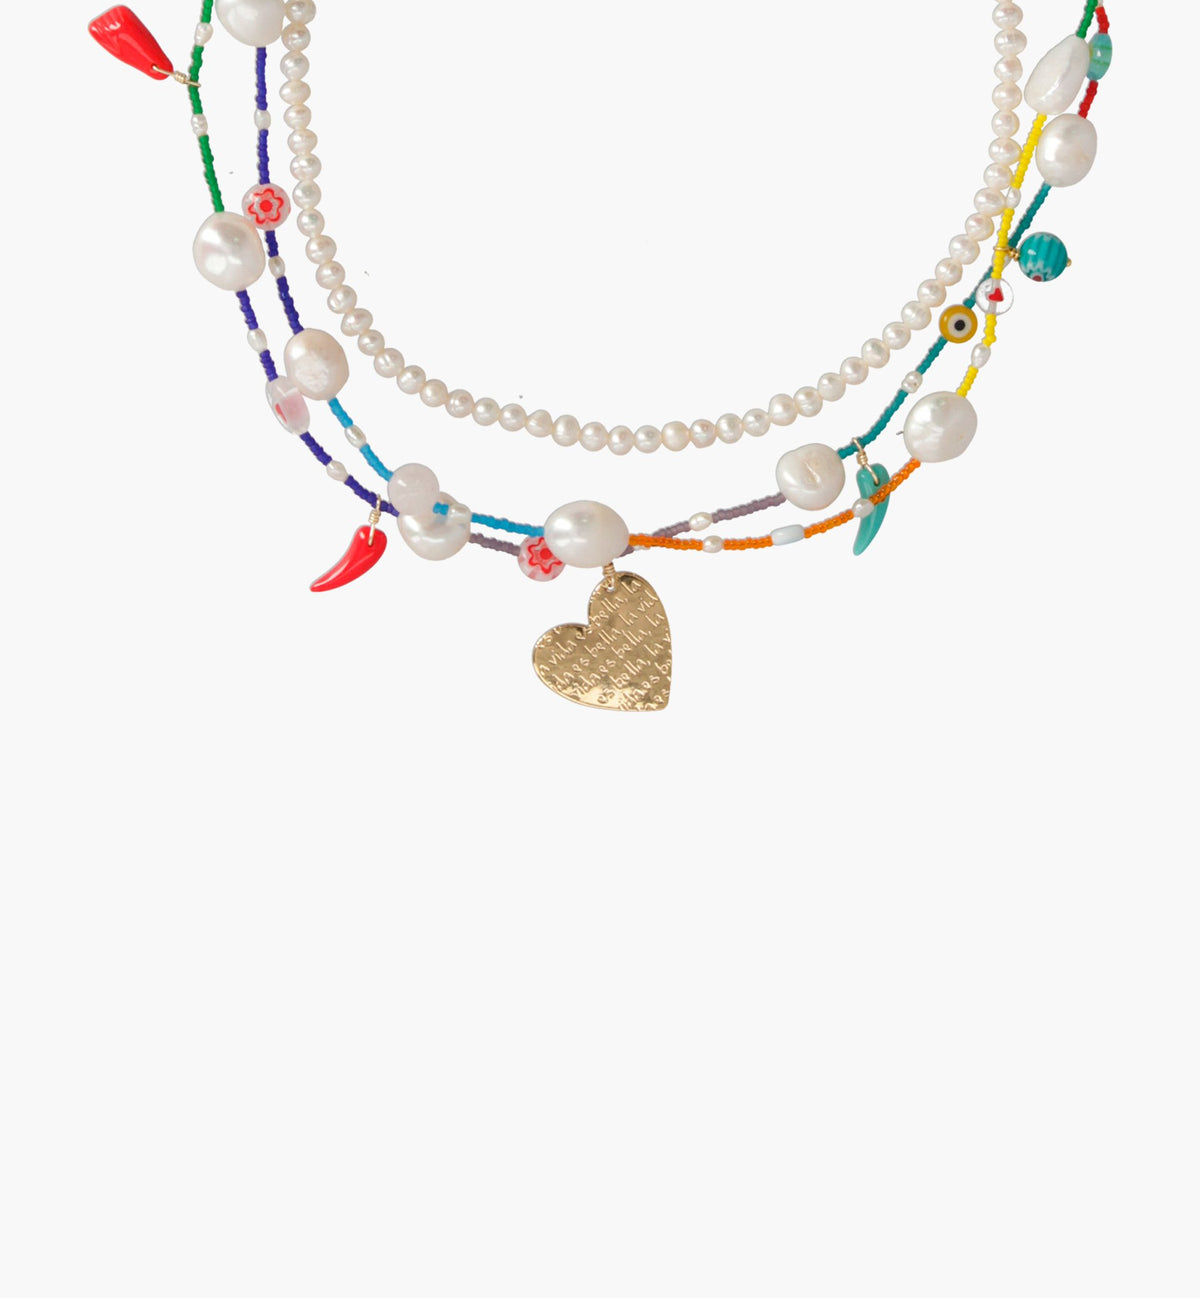 Colorful Life Necklace